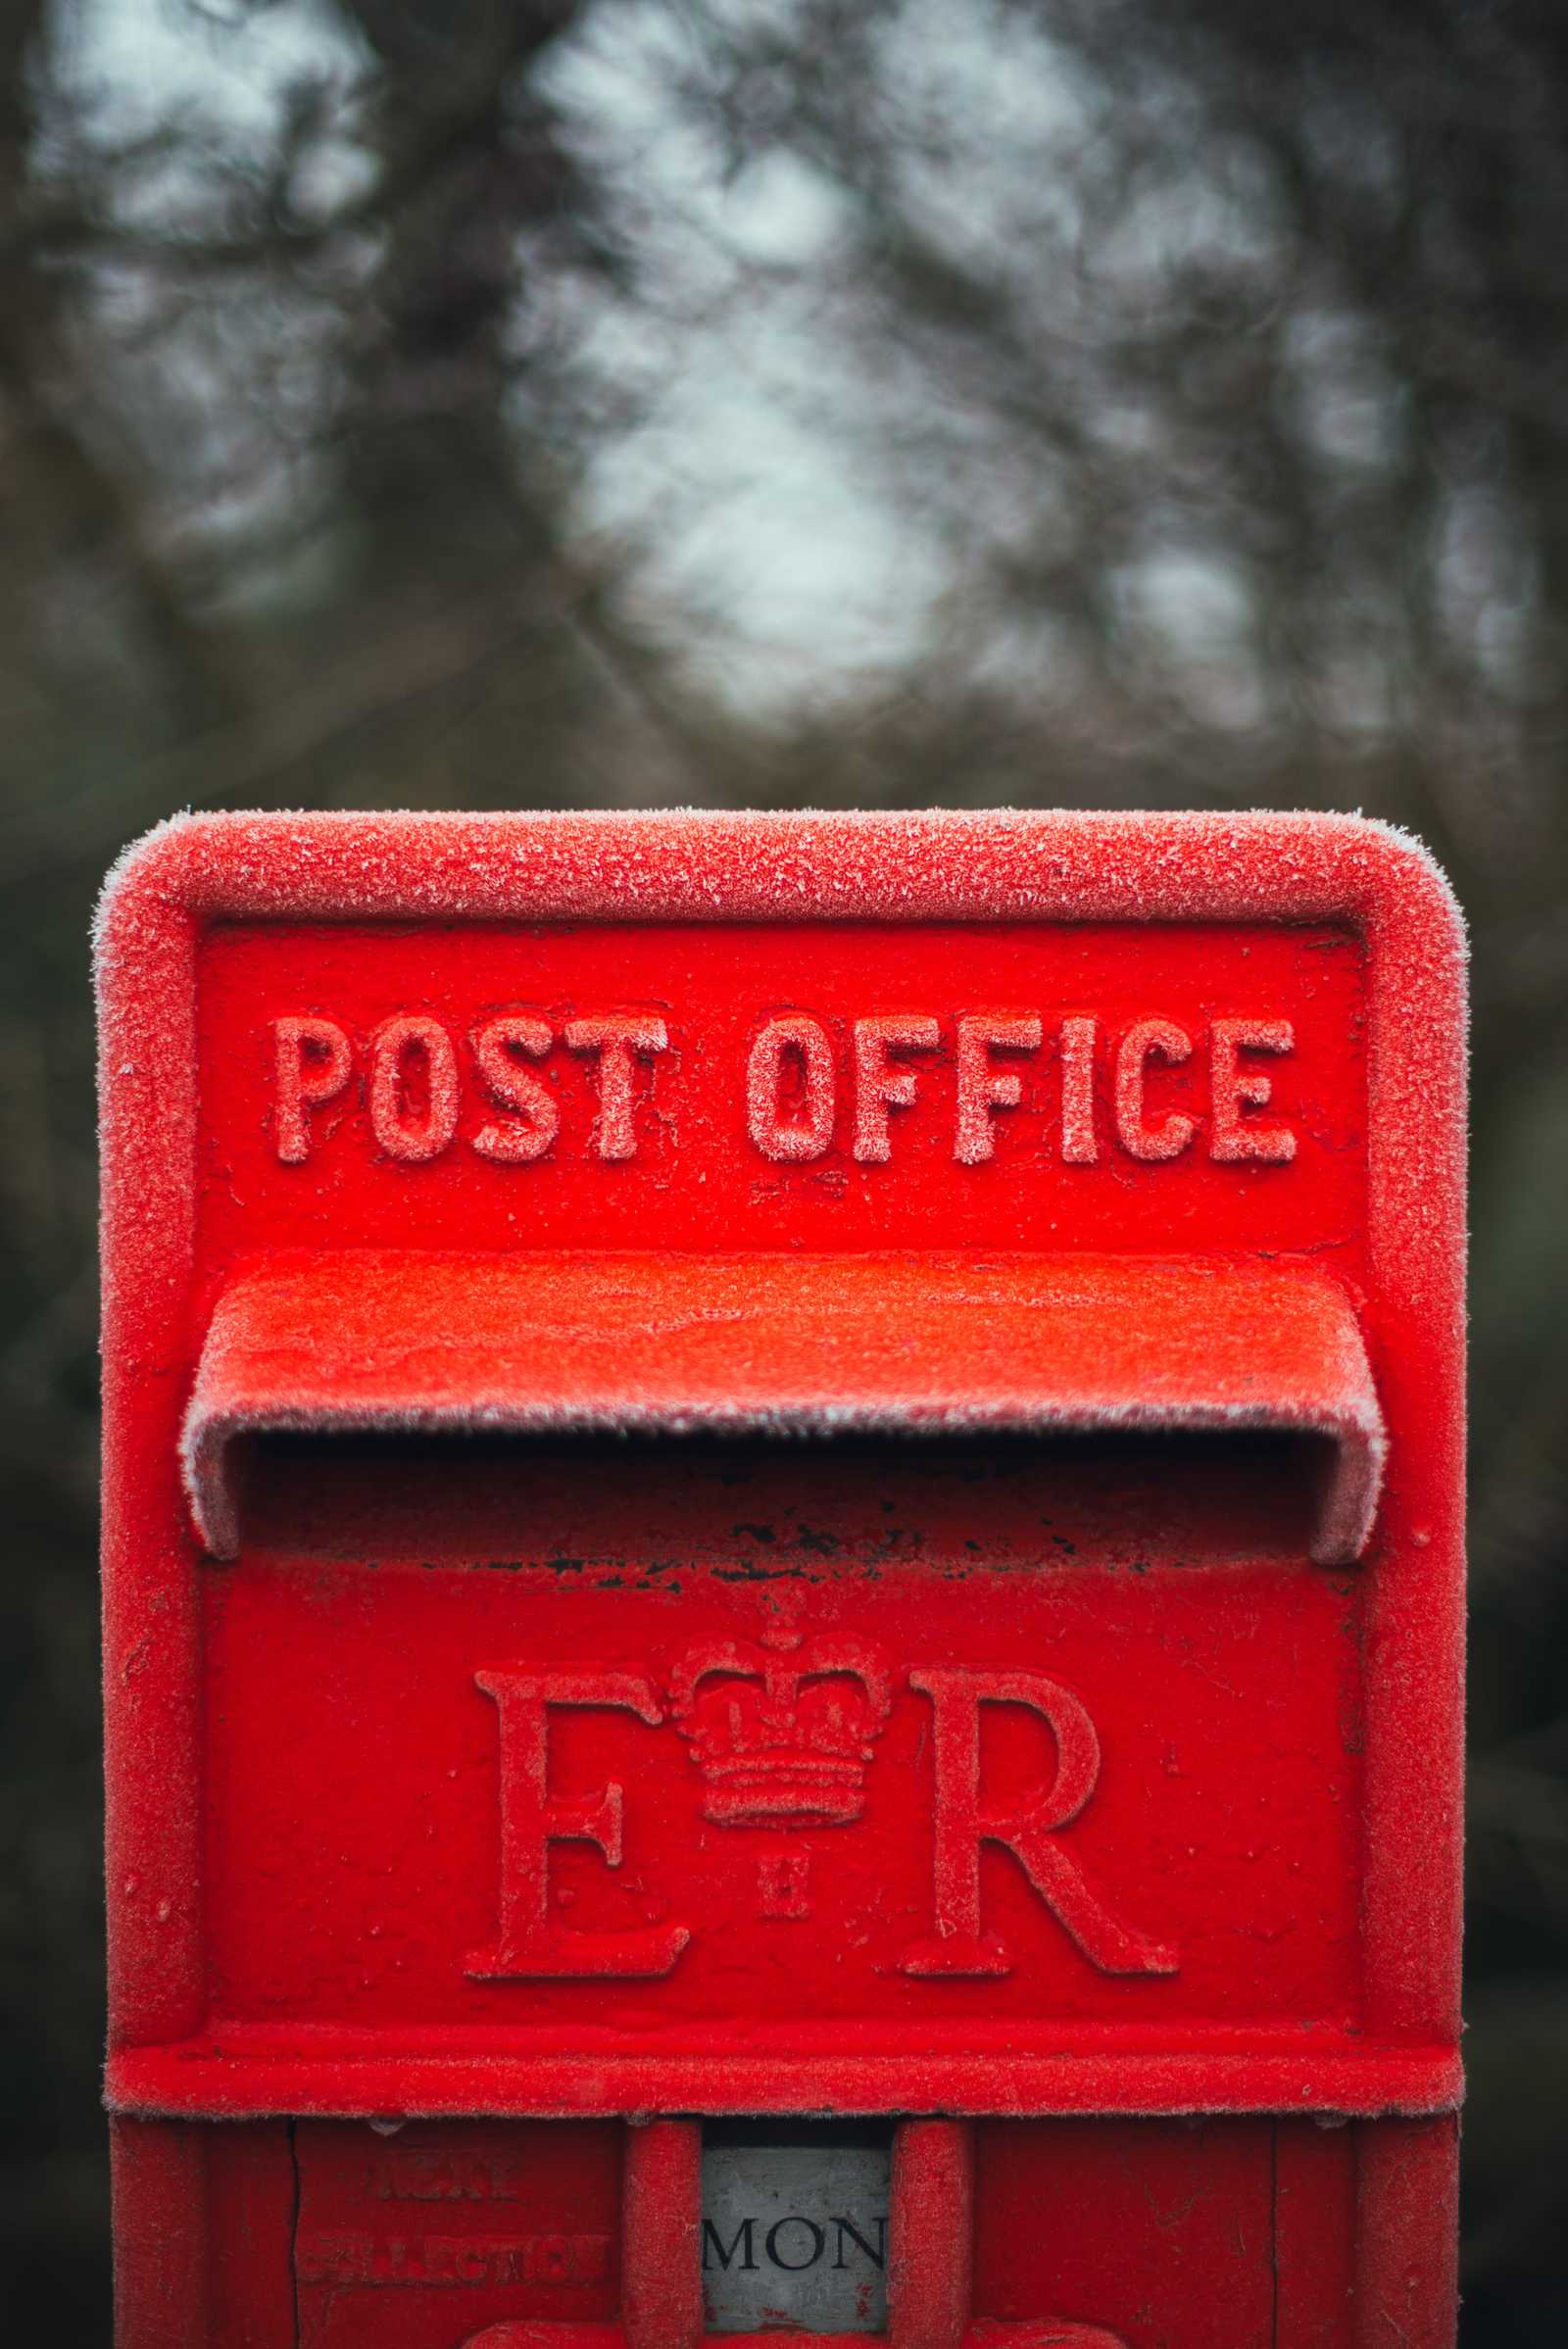 A post box with frost around its edges